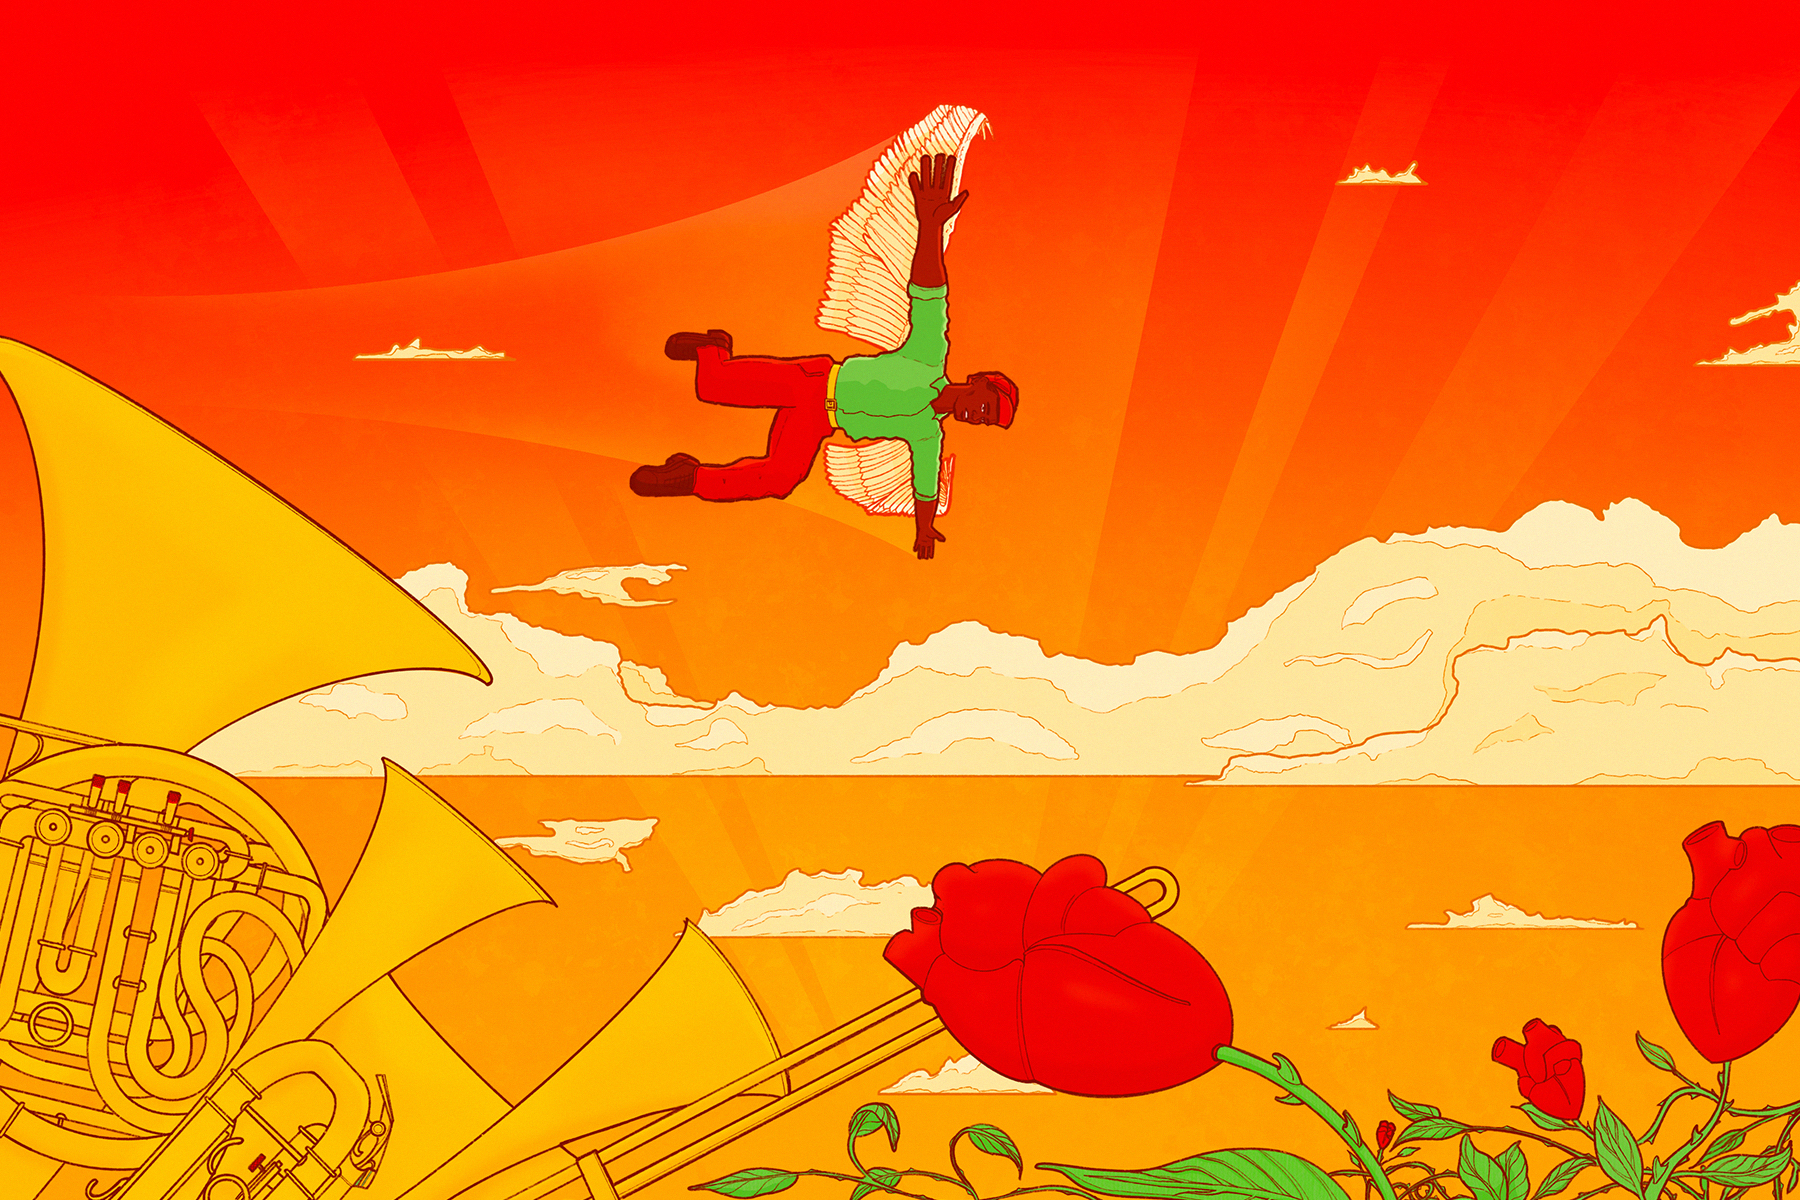 An illustration of a man flying across the sky. there are trumpets in the left-hand corner and roses in the right. He is wearing a green top and red trousers. There are clouds in the sky, which fades from red to yellow.